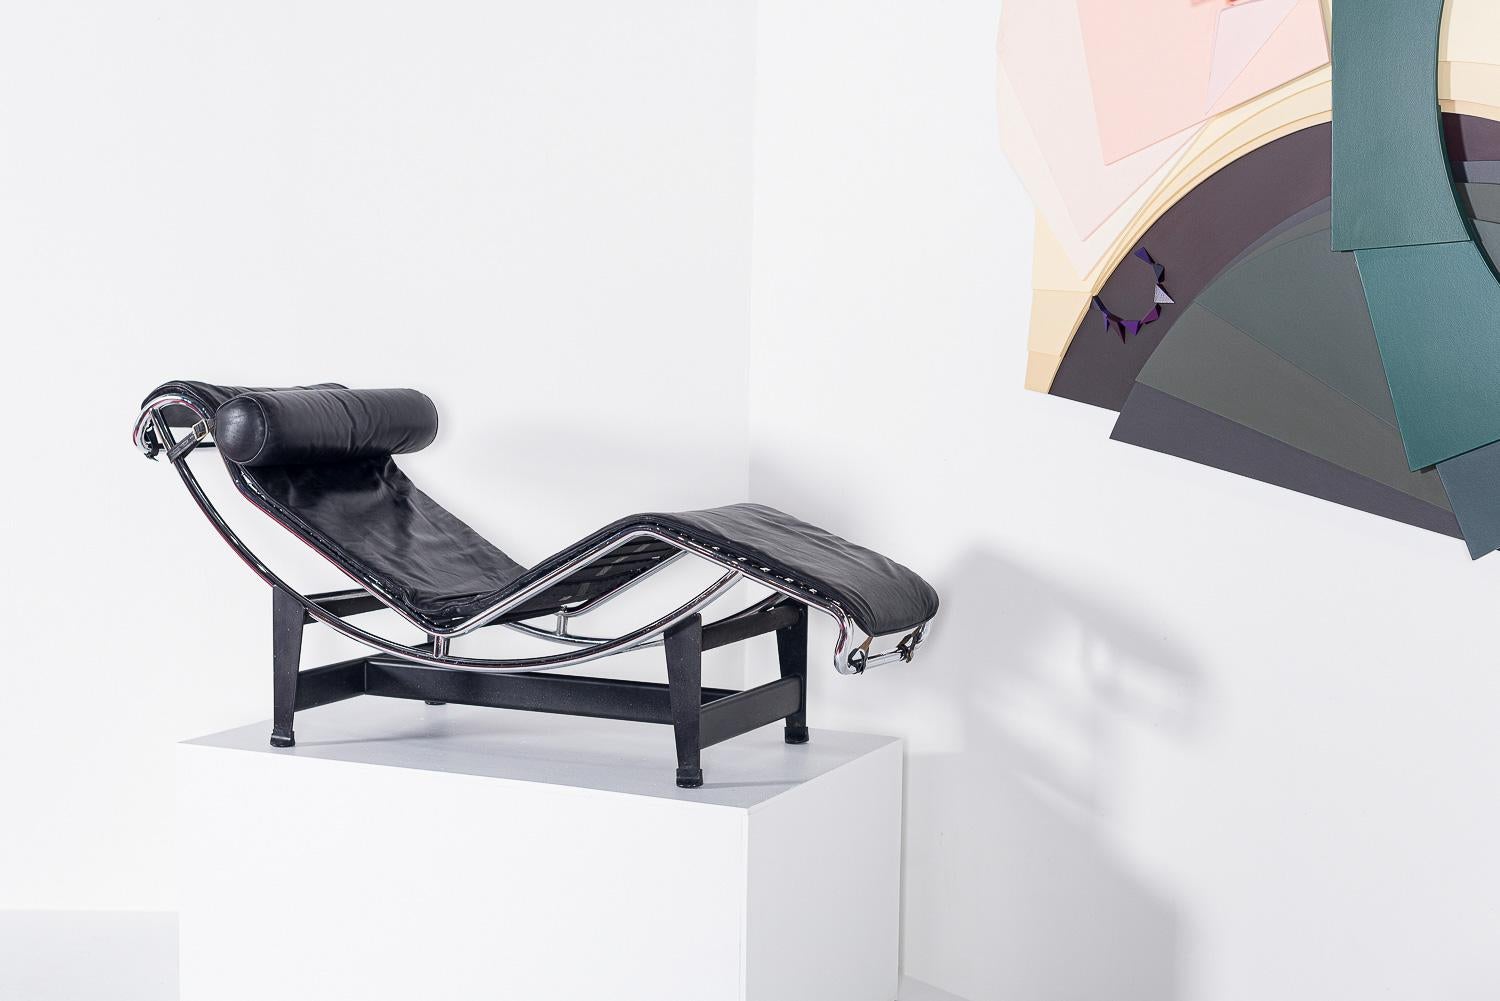 The iconic and ageless LC4 chaise lounge chair was created by Le Corbusier, Charlotte Perriand and Pierre Jeanneret in 1928 and exhibited at the Paris Salon d’Automne in 1929. Starting with the analysis of lounge chairs and the proportions inferred